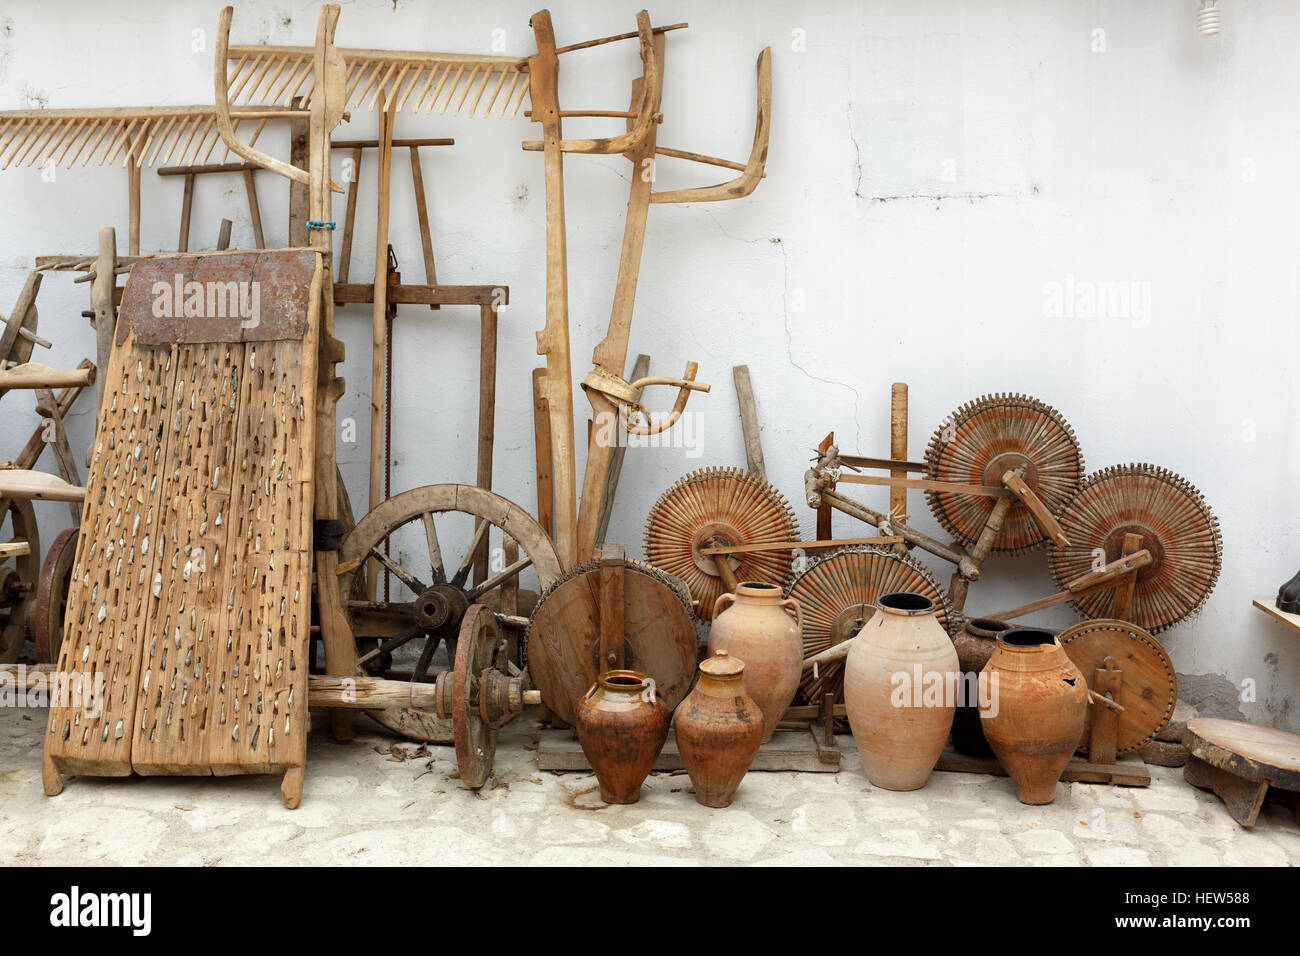 Background with a group of old and unused wooden wheels of carts and old fashioned yarn producing machinery equipments Stock Photo